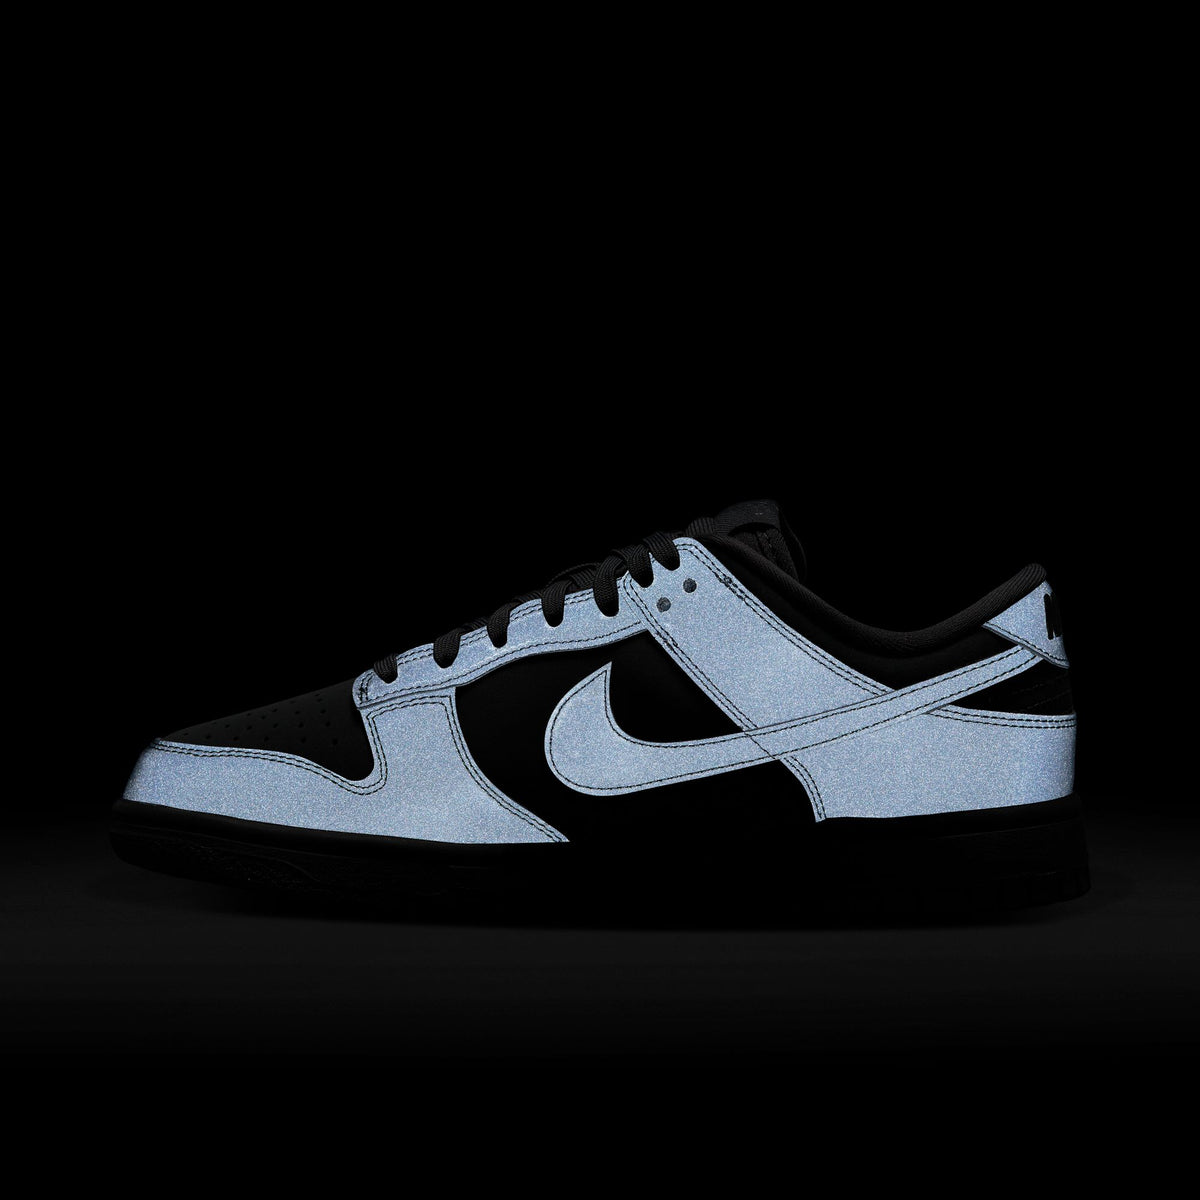 WMNS Nike Dunk Low "Cyber Reflective"